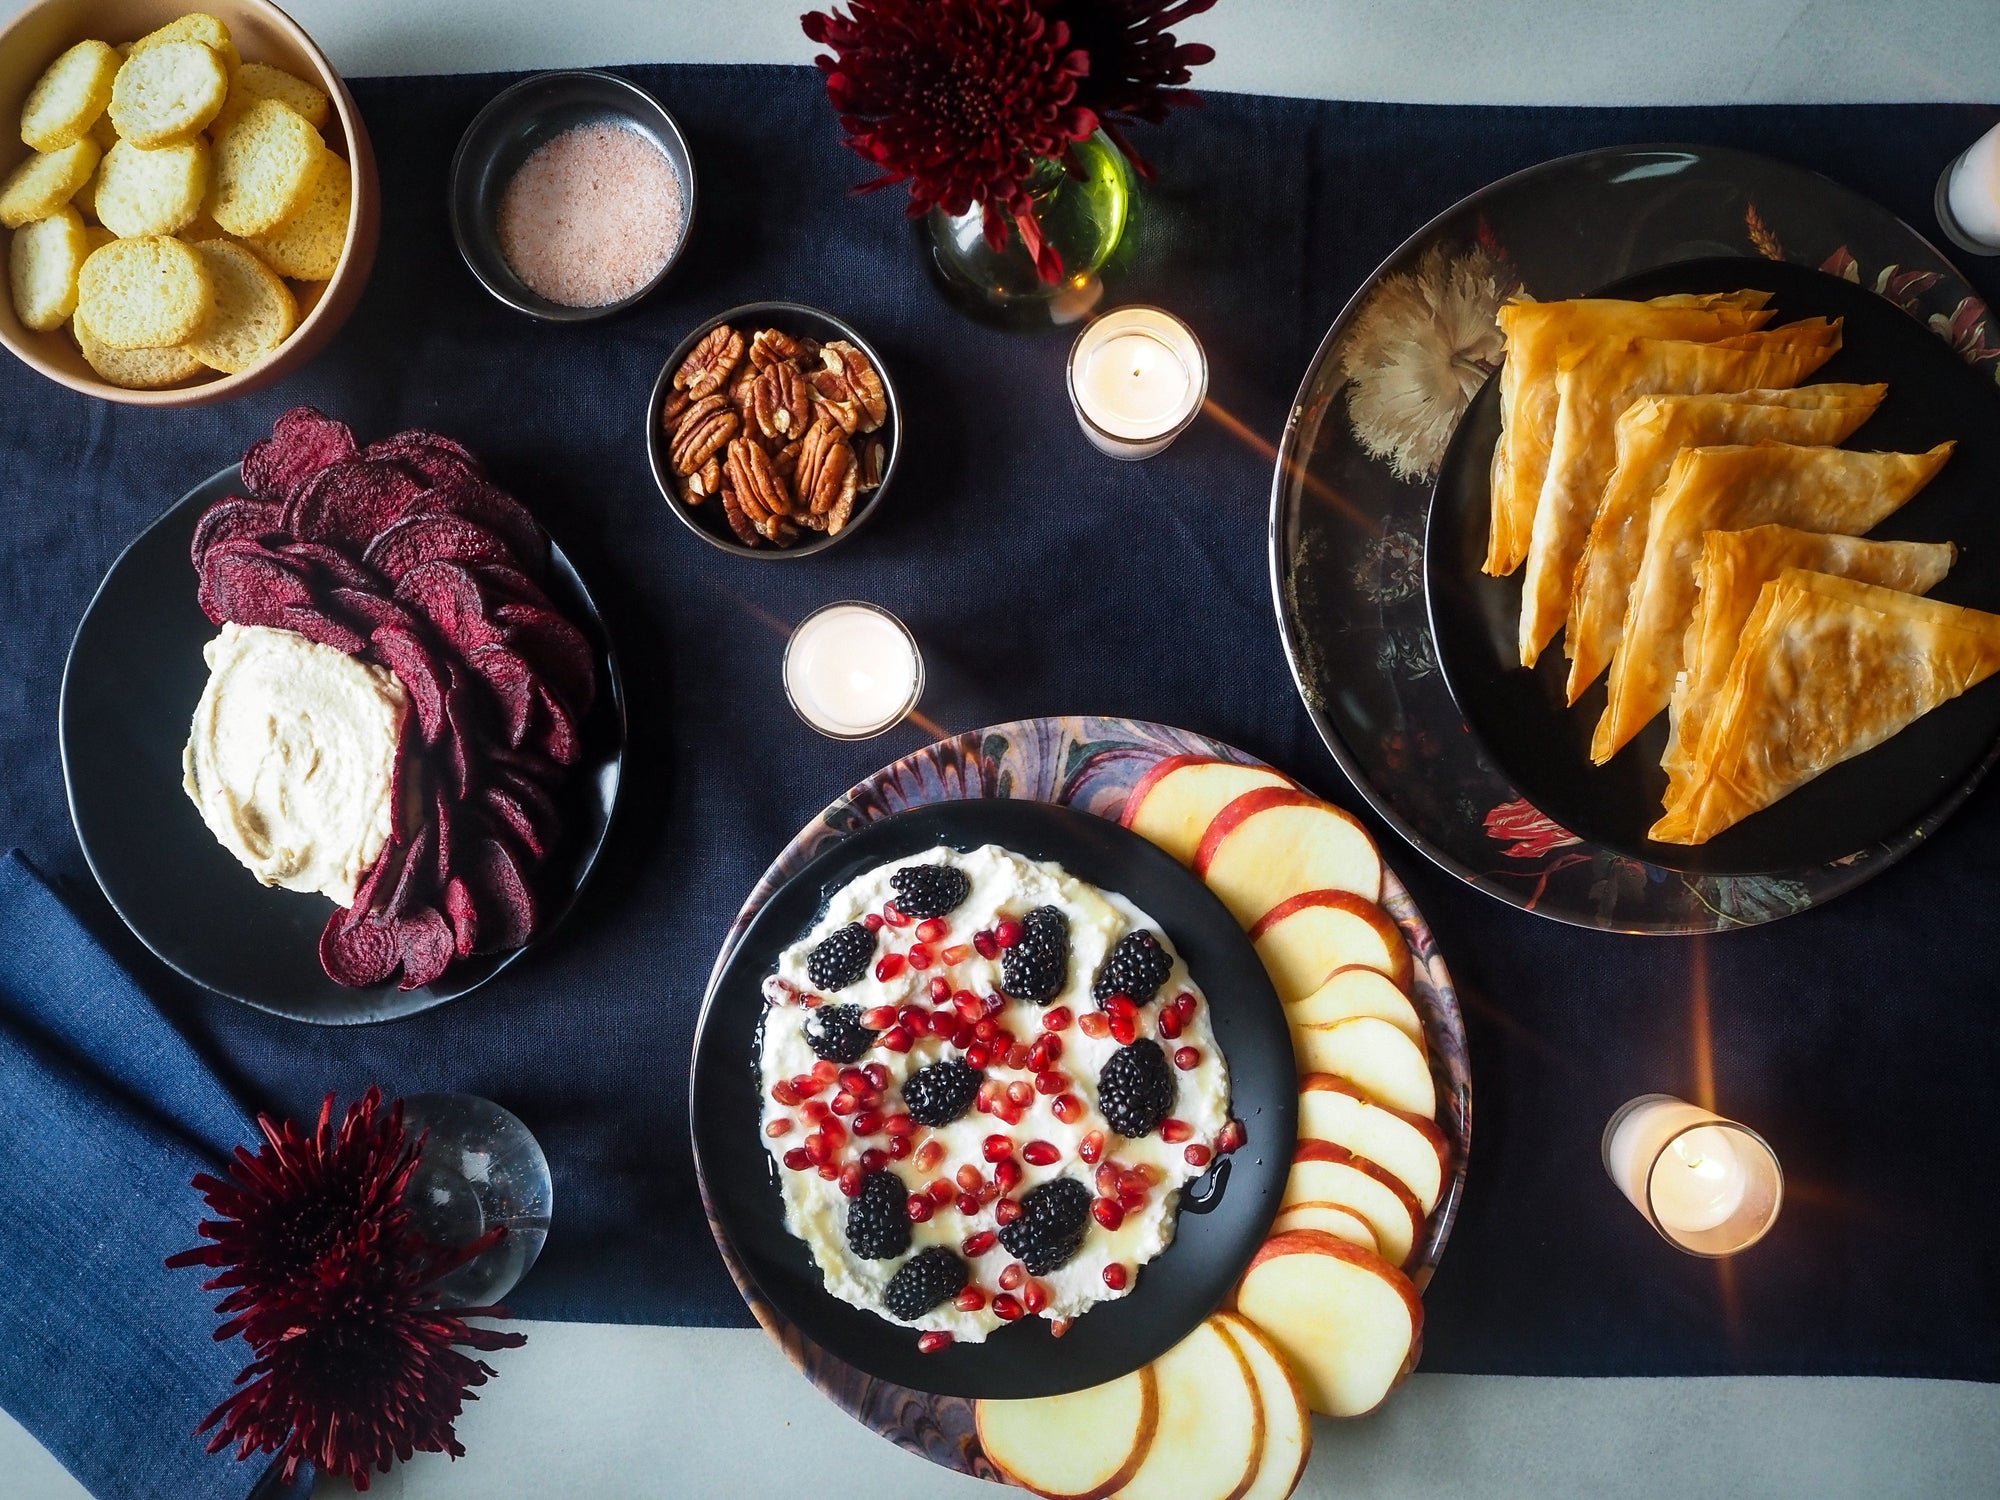 Your Guide to a Fun, Unfussy Friendsgiving